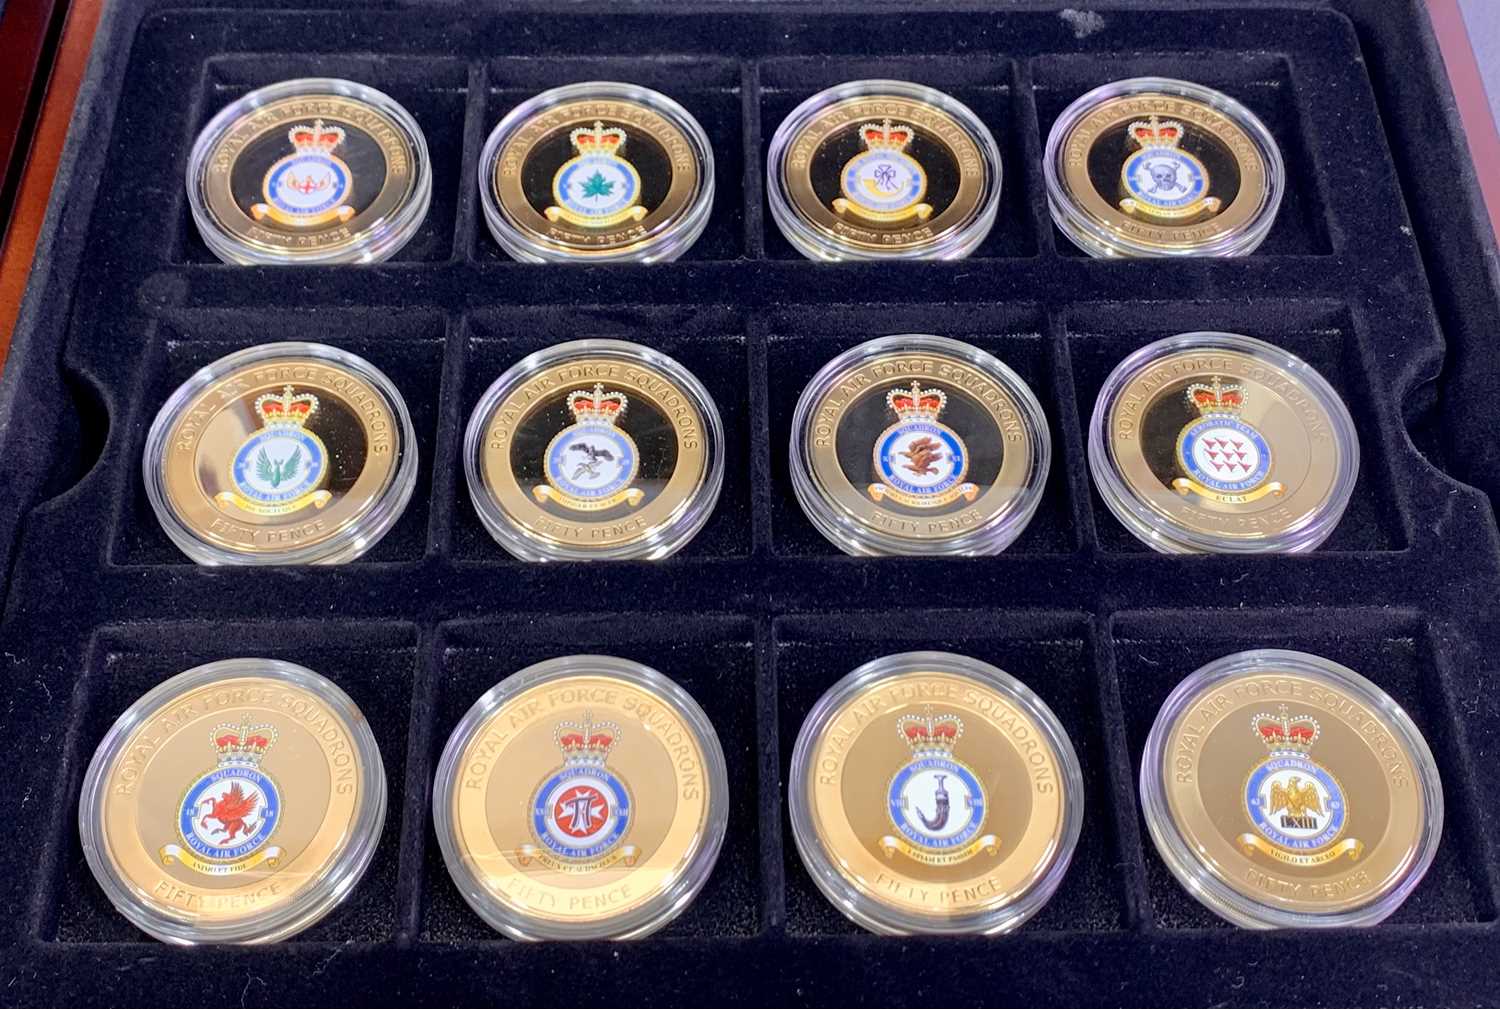 WESTMINSTER SQUADRONS OF THE ROYAL AIR FORCE COIN COLLECTION - 32 x 50p 24ct gold plated coins in - Image 3 of 4